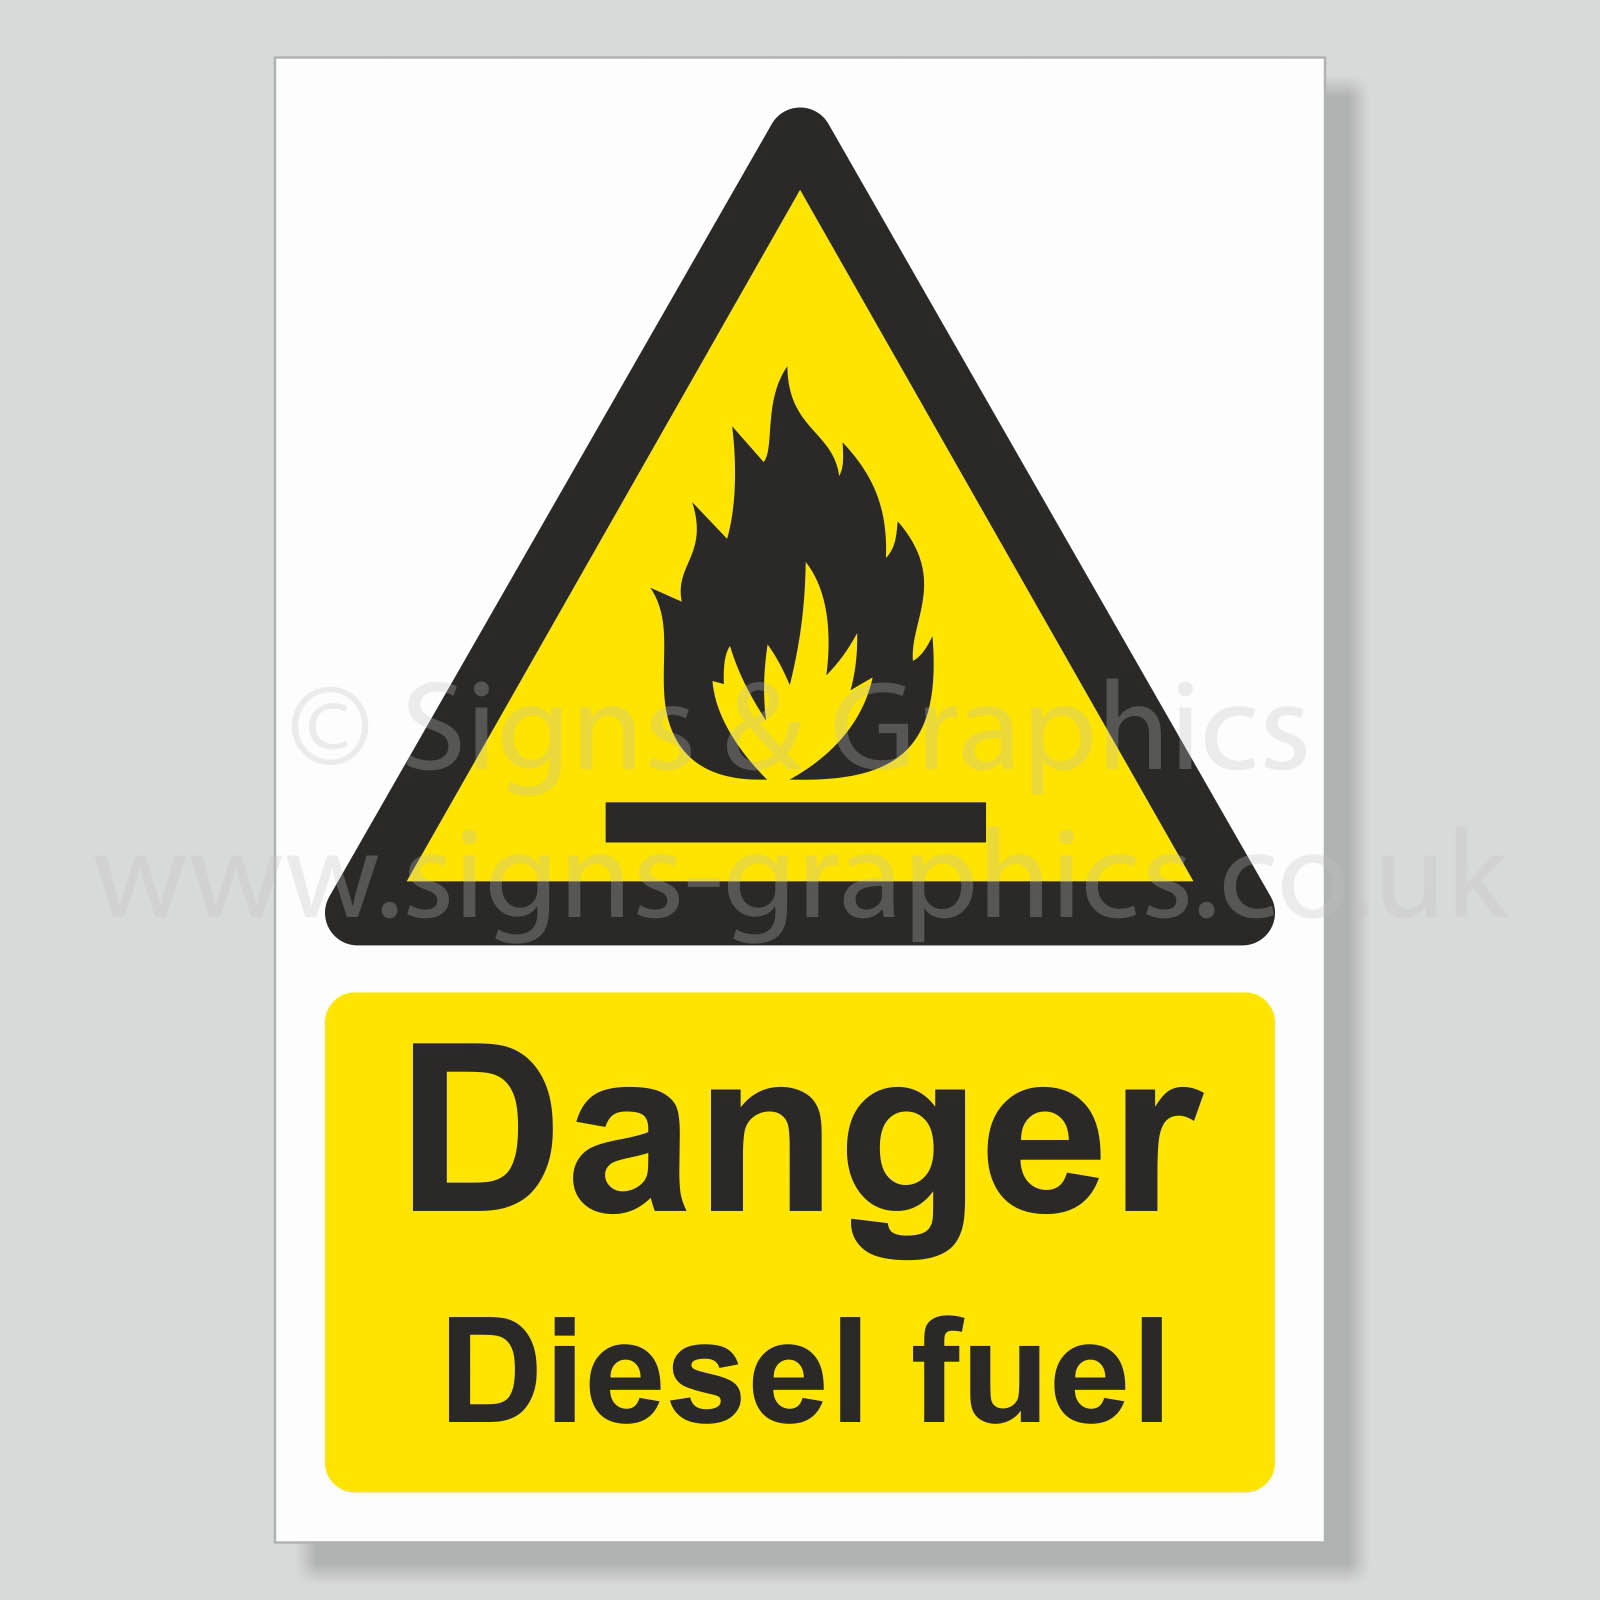 Danger Diesel fuel health and safety sign | Signs & Graphics